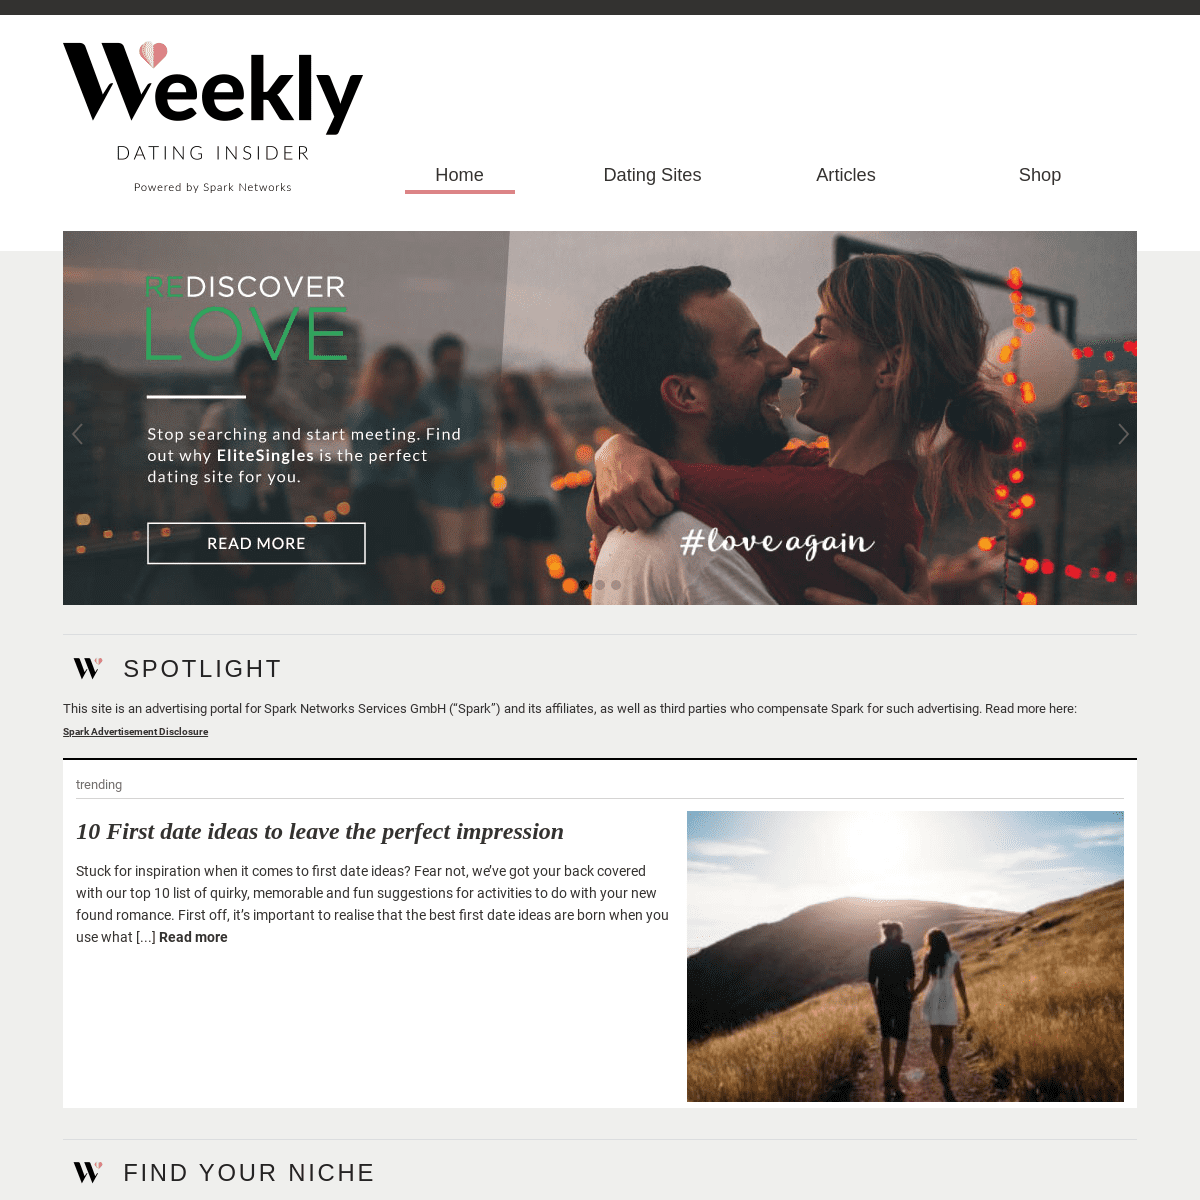 Home | Weekly Dating Insider